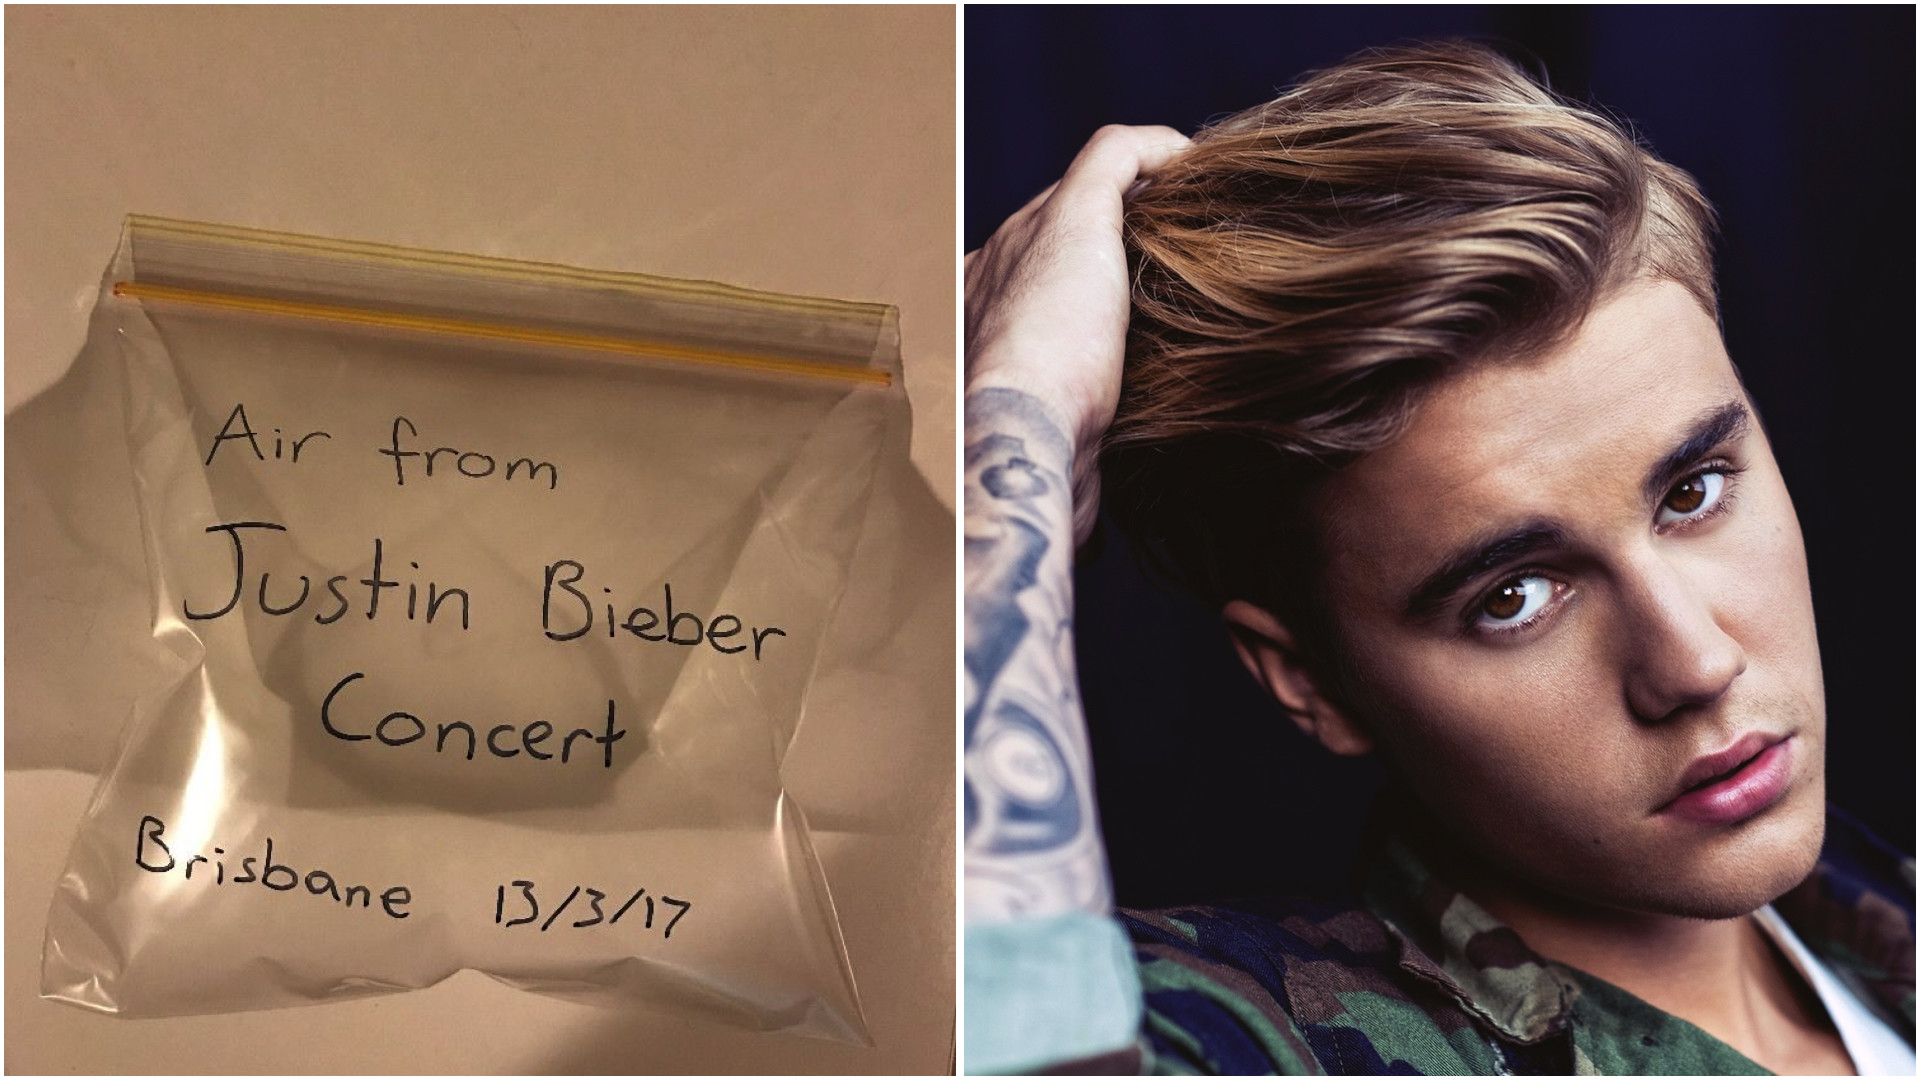 1920x1080 People Are Selling Air From Justin Bieber's Aussie Tour On eBay Now